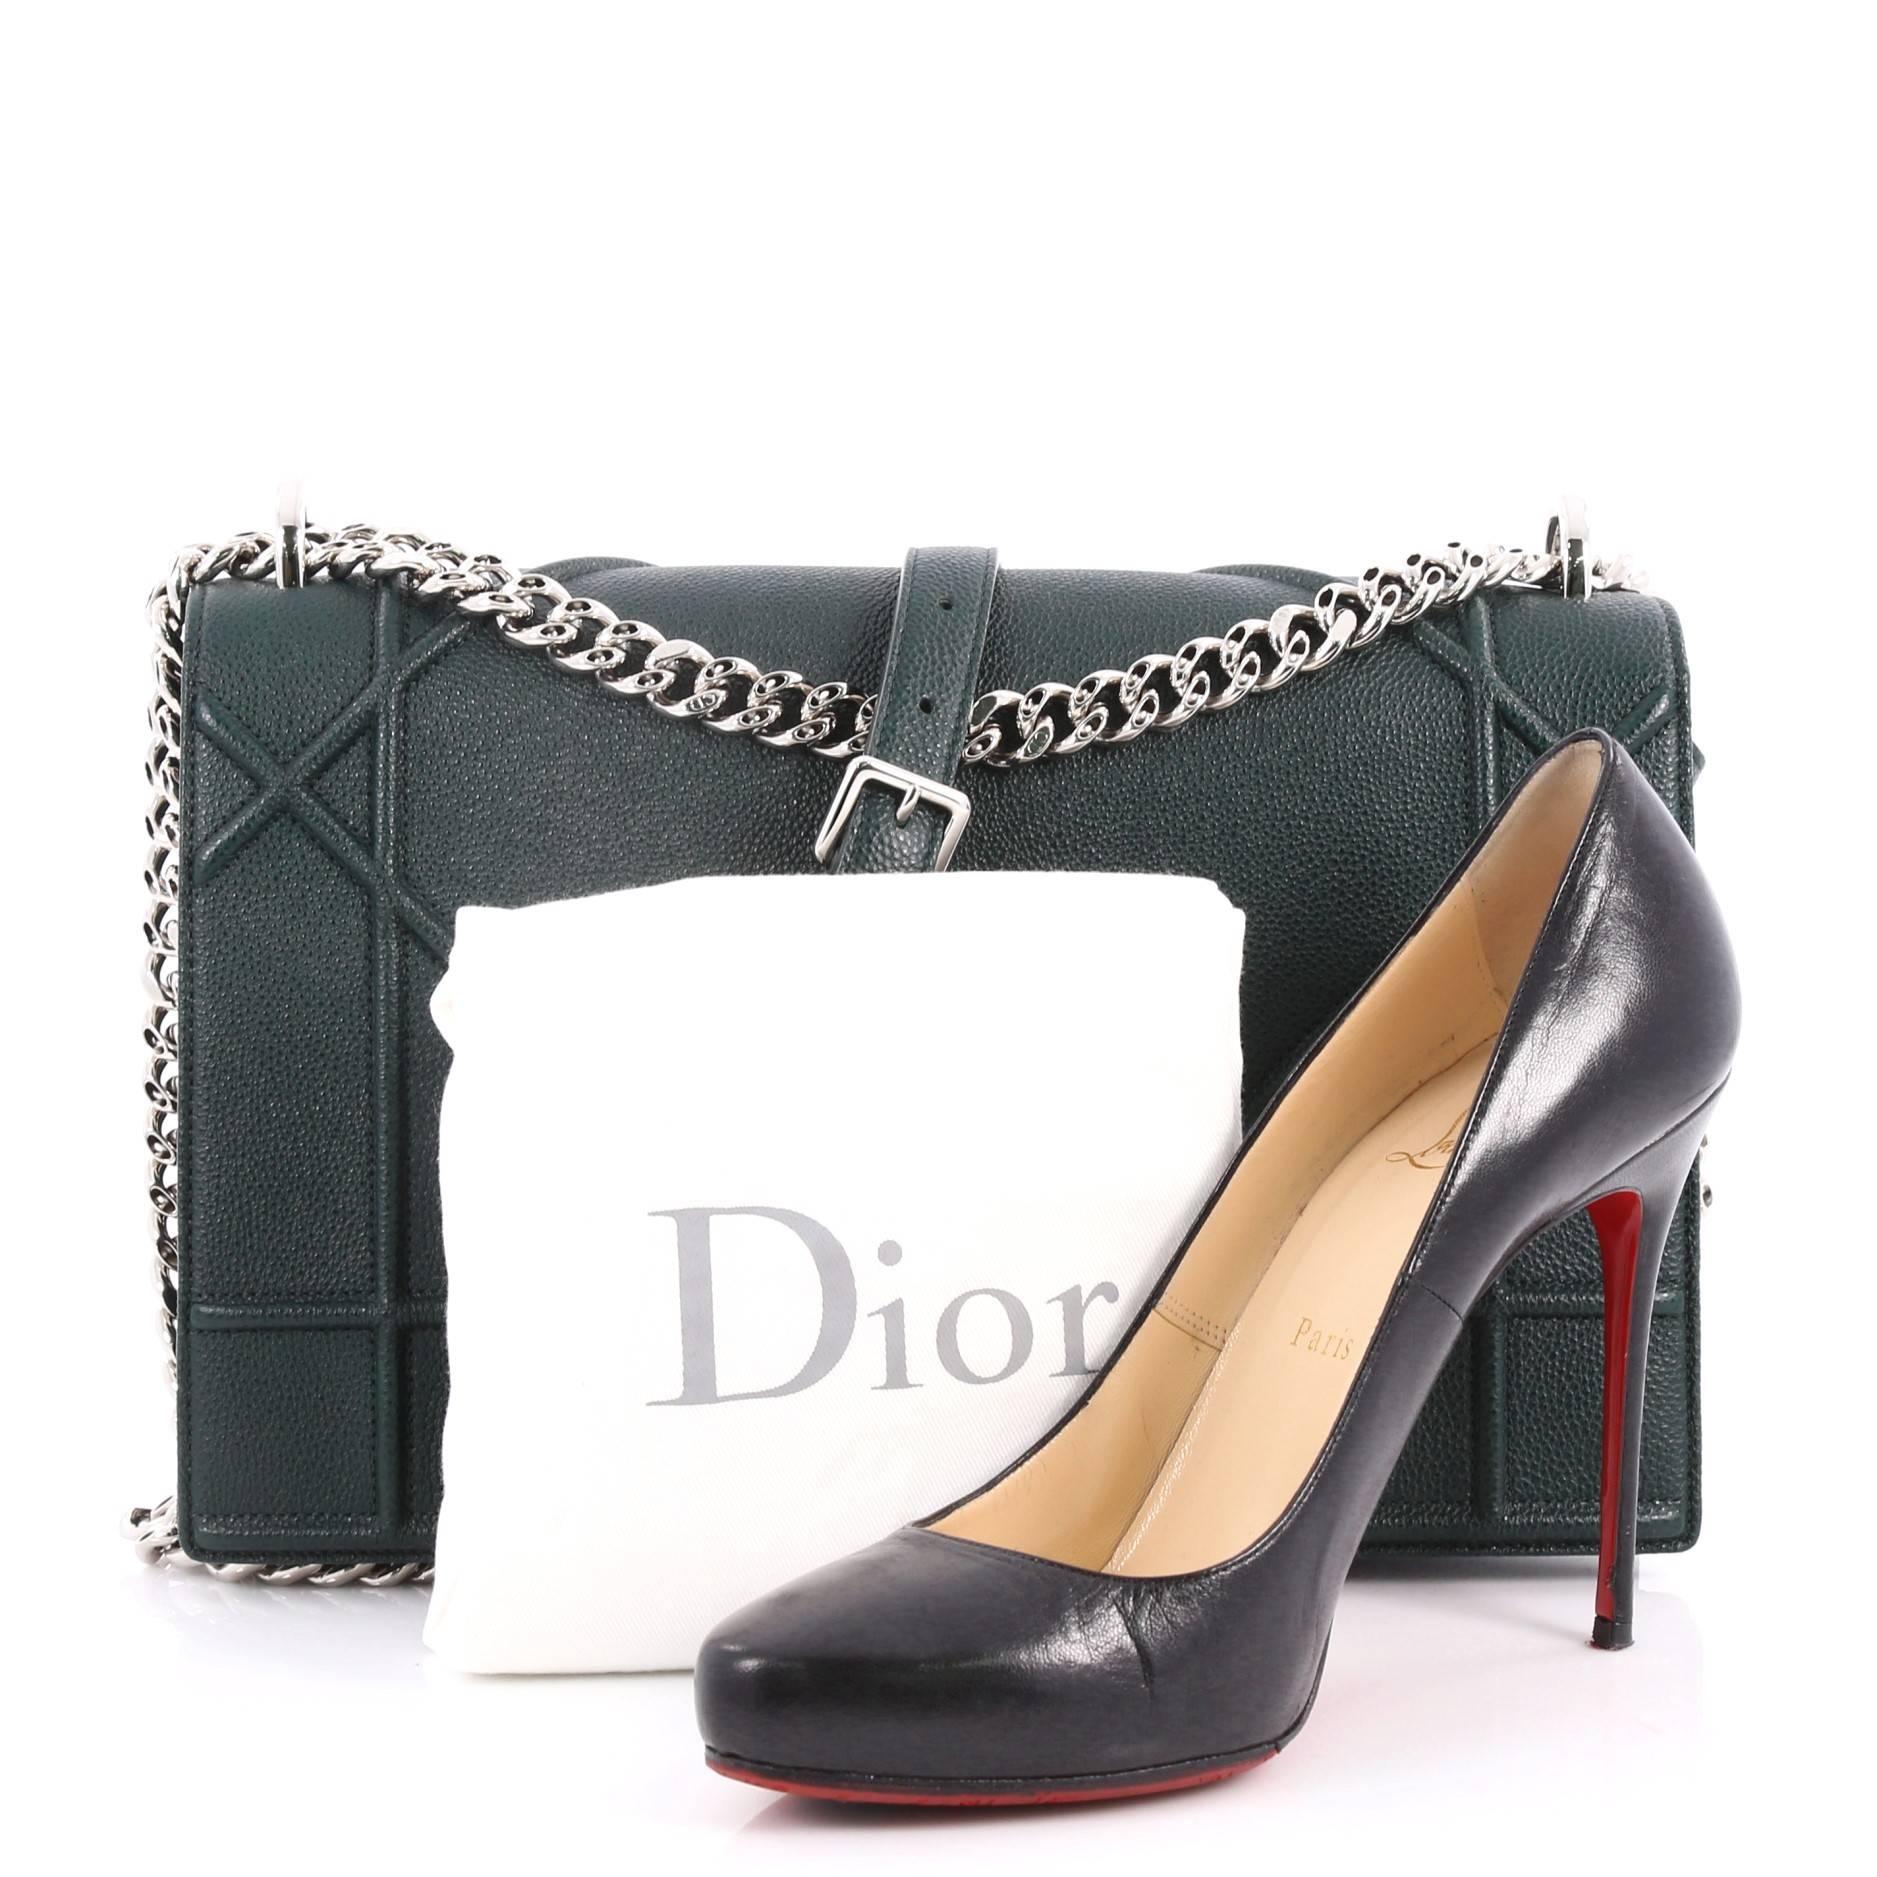 This authentic Christian Dior Diorama Flap Bag Grained Calfskin Medium is a new classic from Dior. Crafted in green grained calfskin leather, this architectural flap bag features an oversized graphic-style cannage quilt design, chunky chain strap